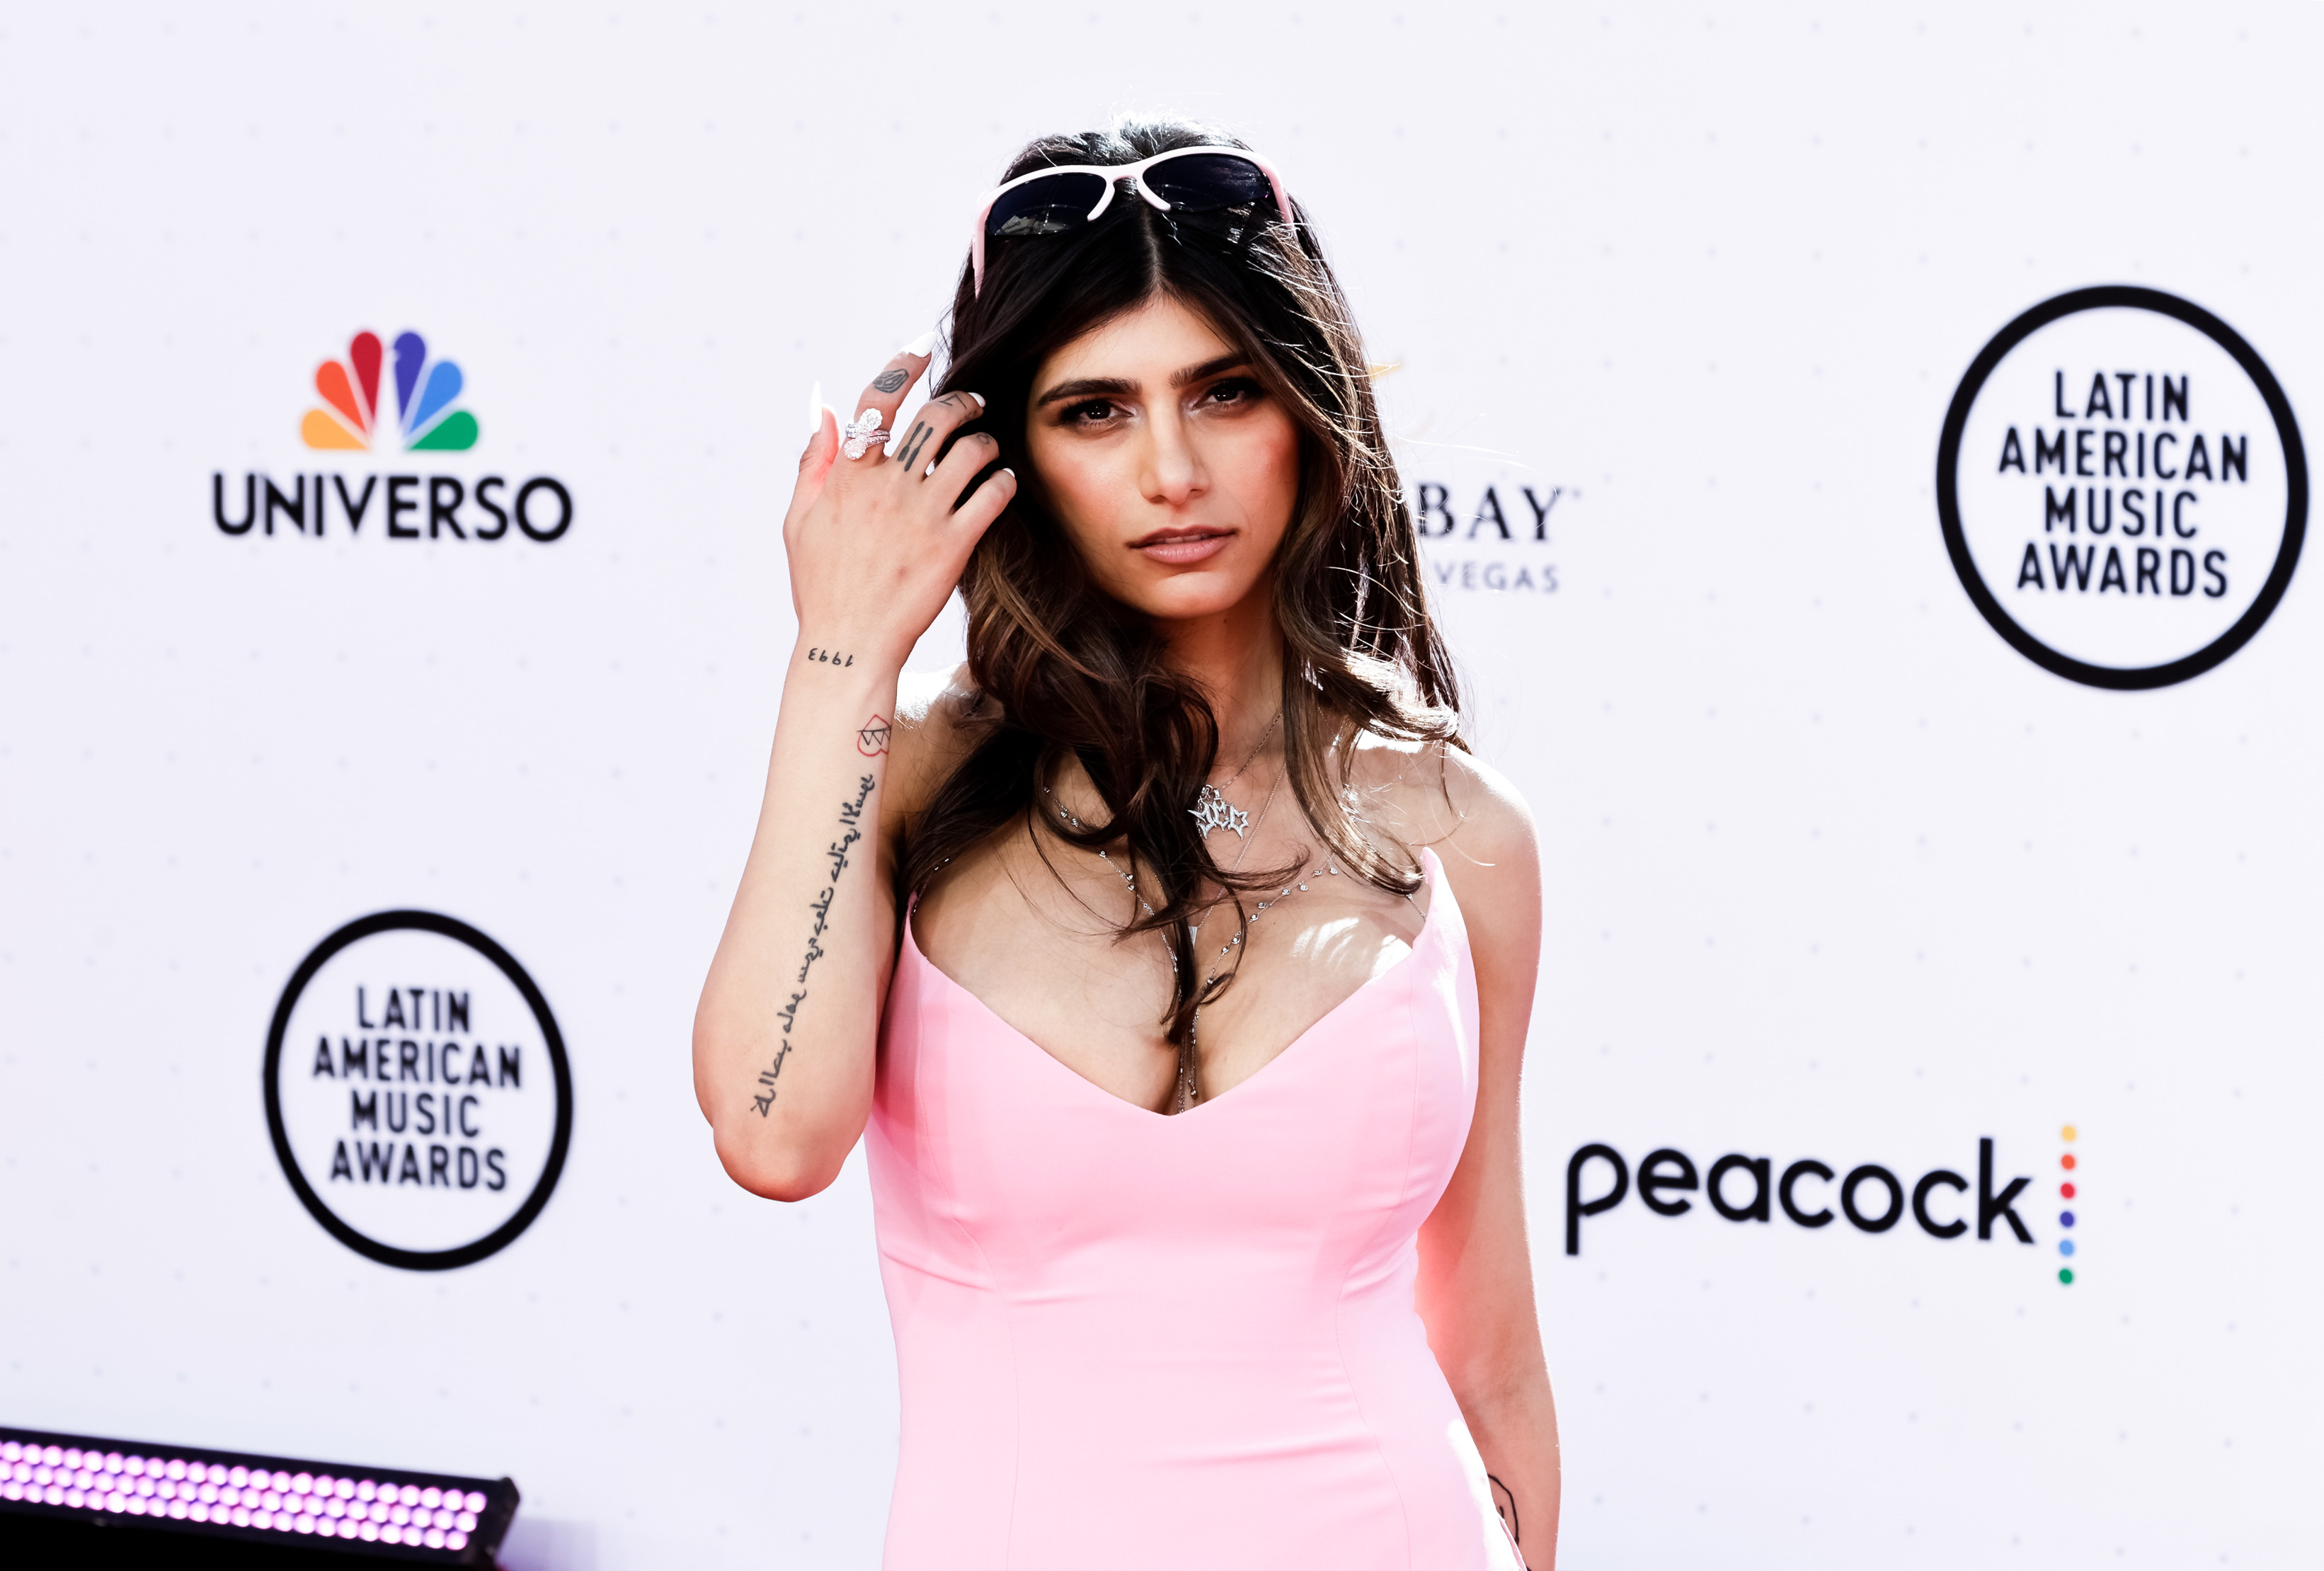 Mia Khalifa speaks out after Palestinian students shot in Vermont